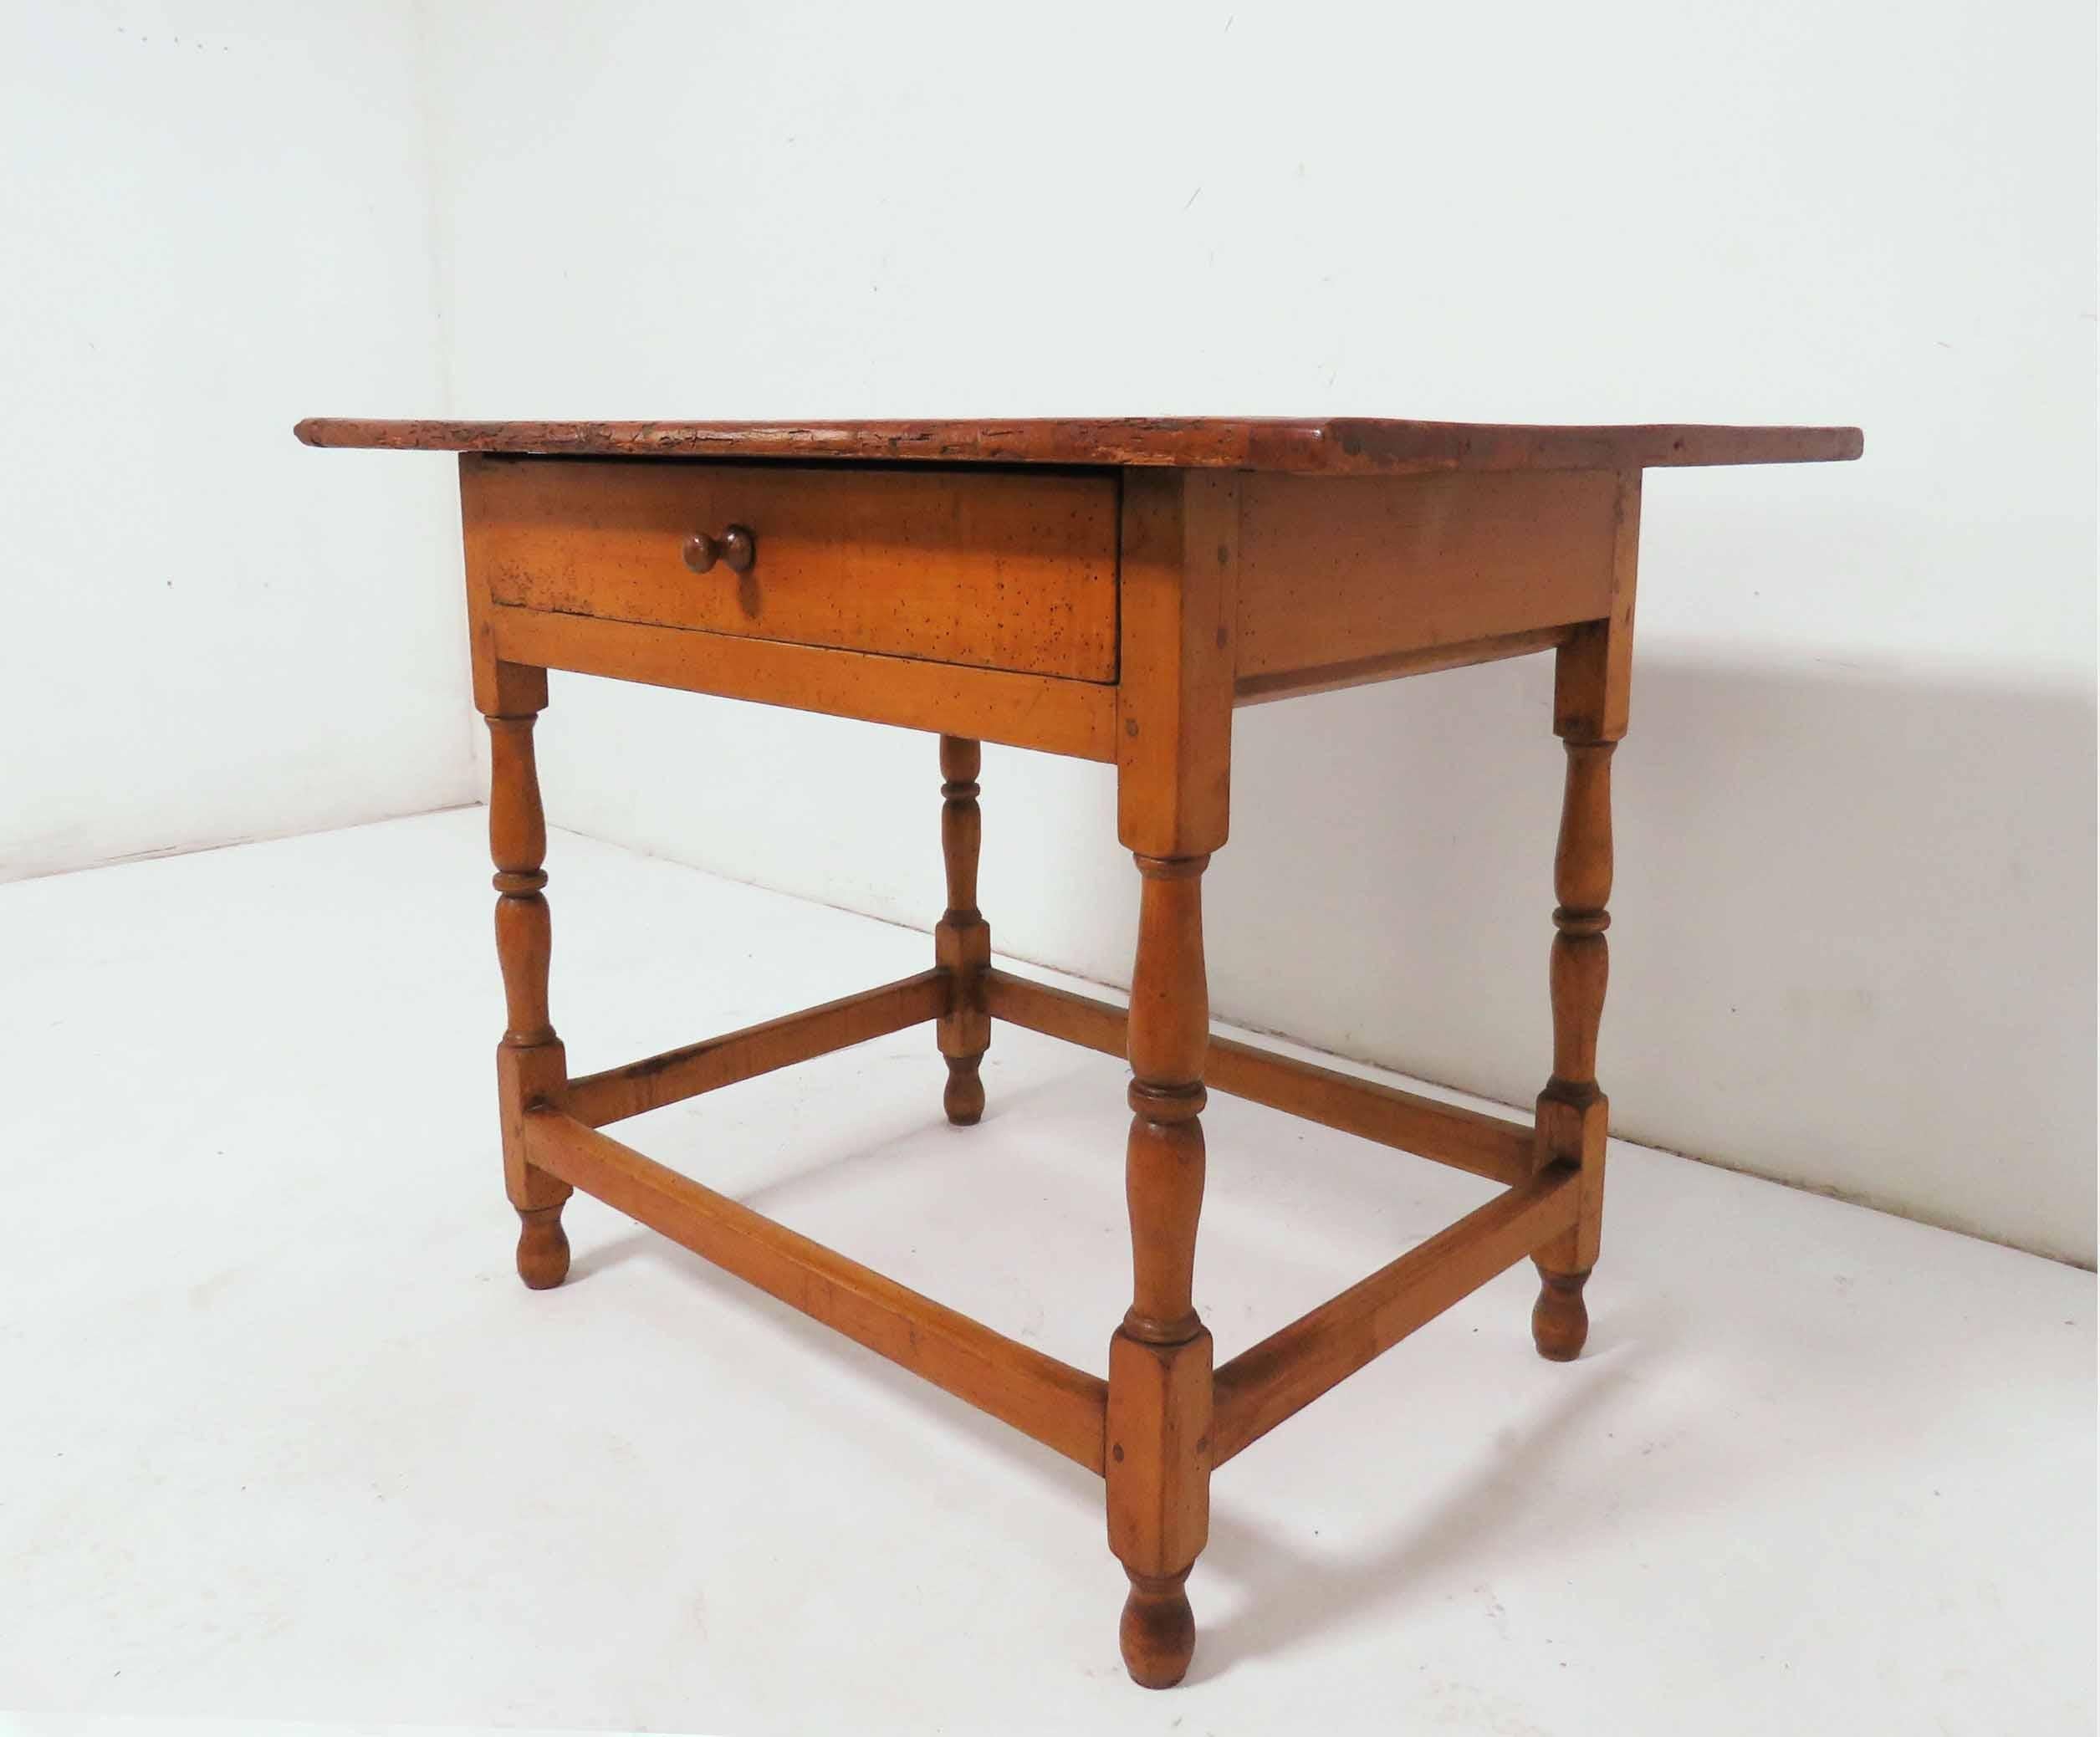 An 18th century American tavern table in pine with a single drawer and a breadboard top.